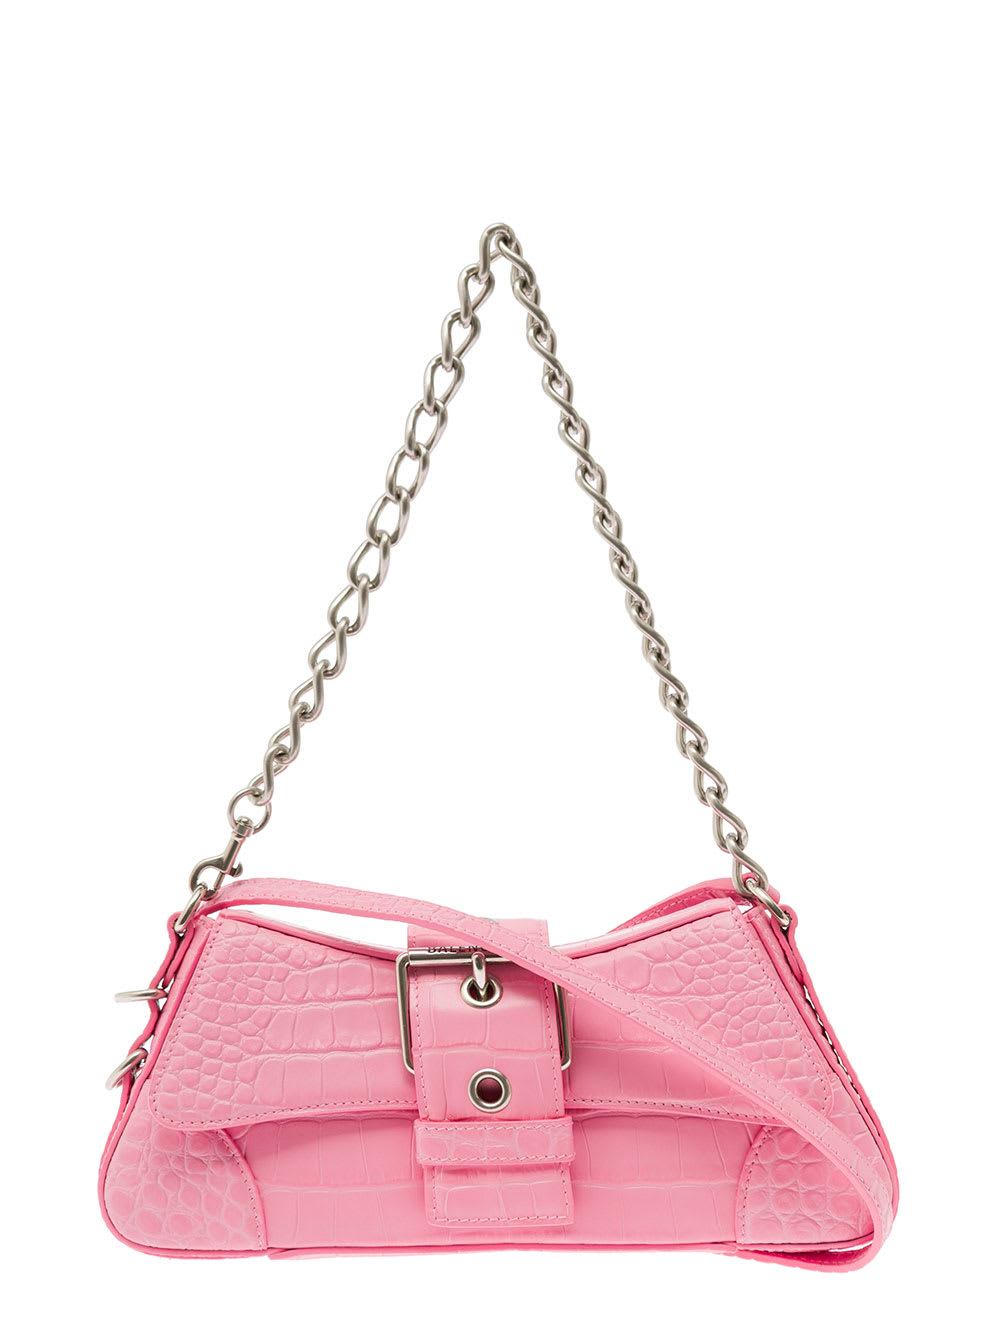 Balenciaga Lindsay Pink Small Shoulder Bag With Strap In Matte Crocodile Embossed Leather Wth Aged-silver Hardware Balenciaga Woman